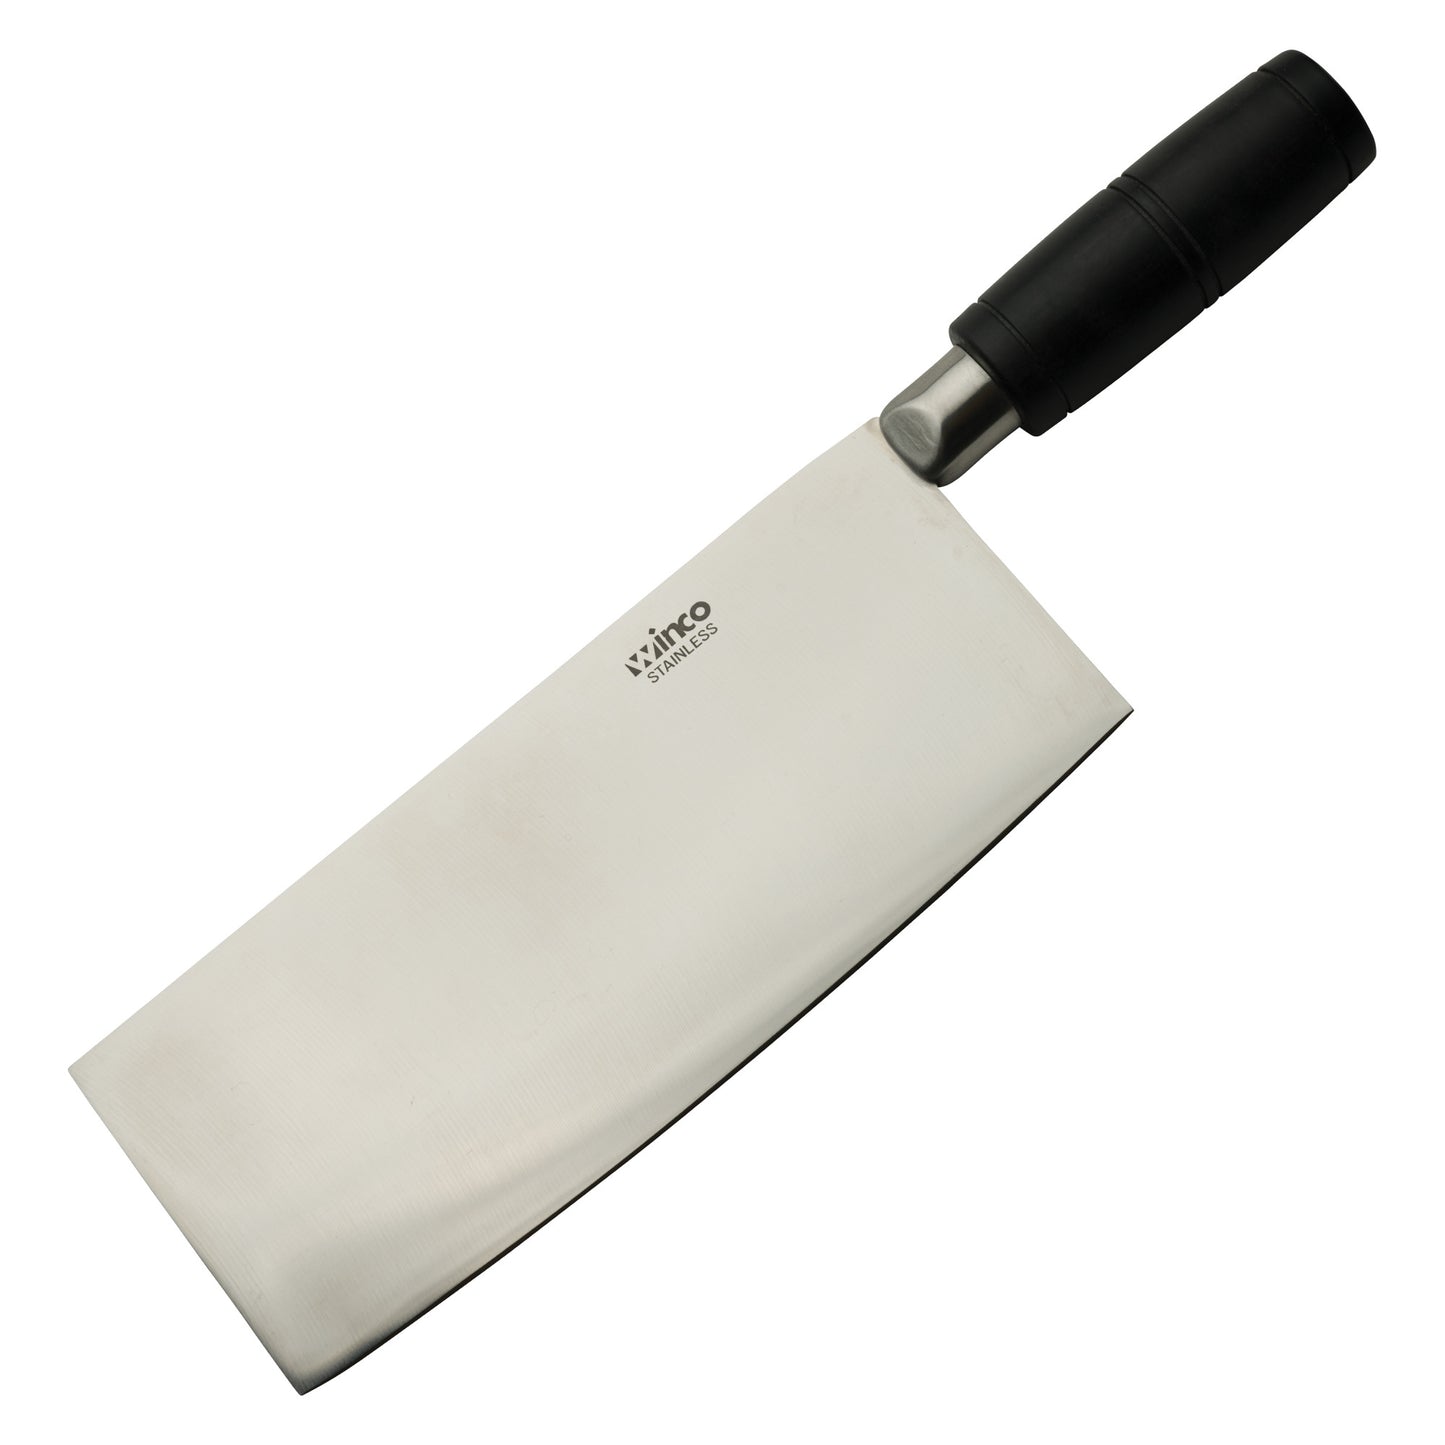 KC-601 - Chinese Cleaver with Round POM Handle, 8" x 3-1/2" Blade